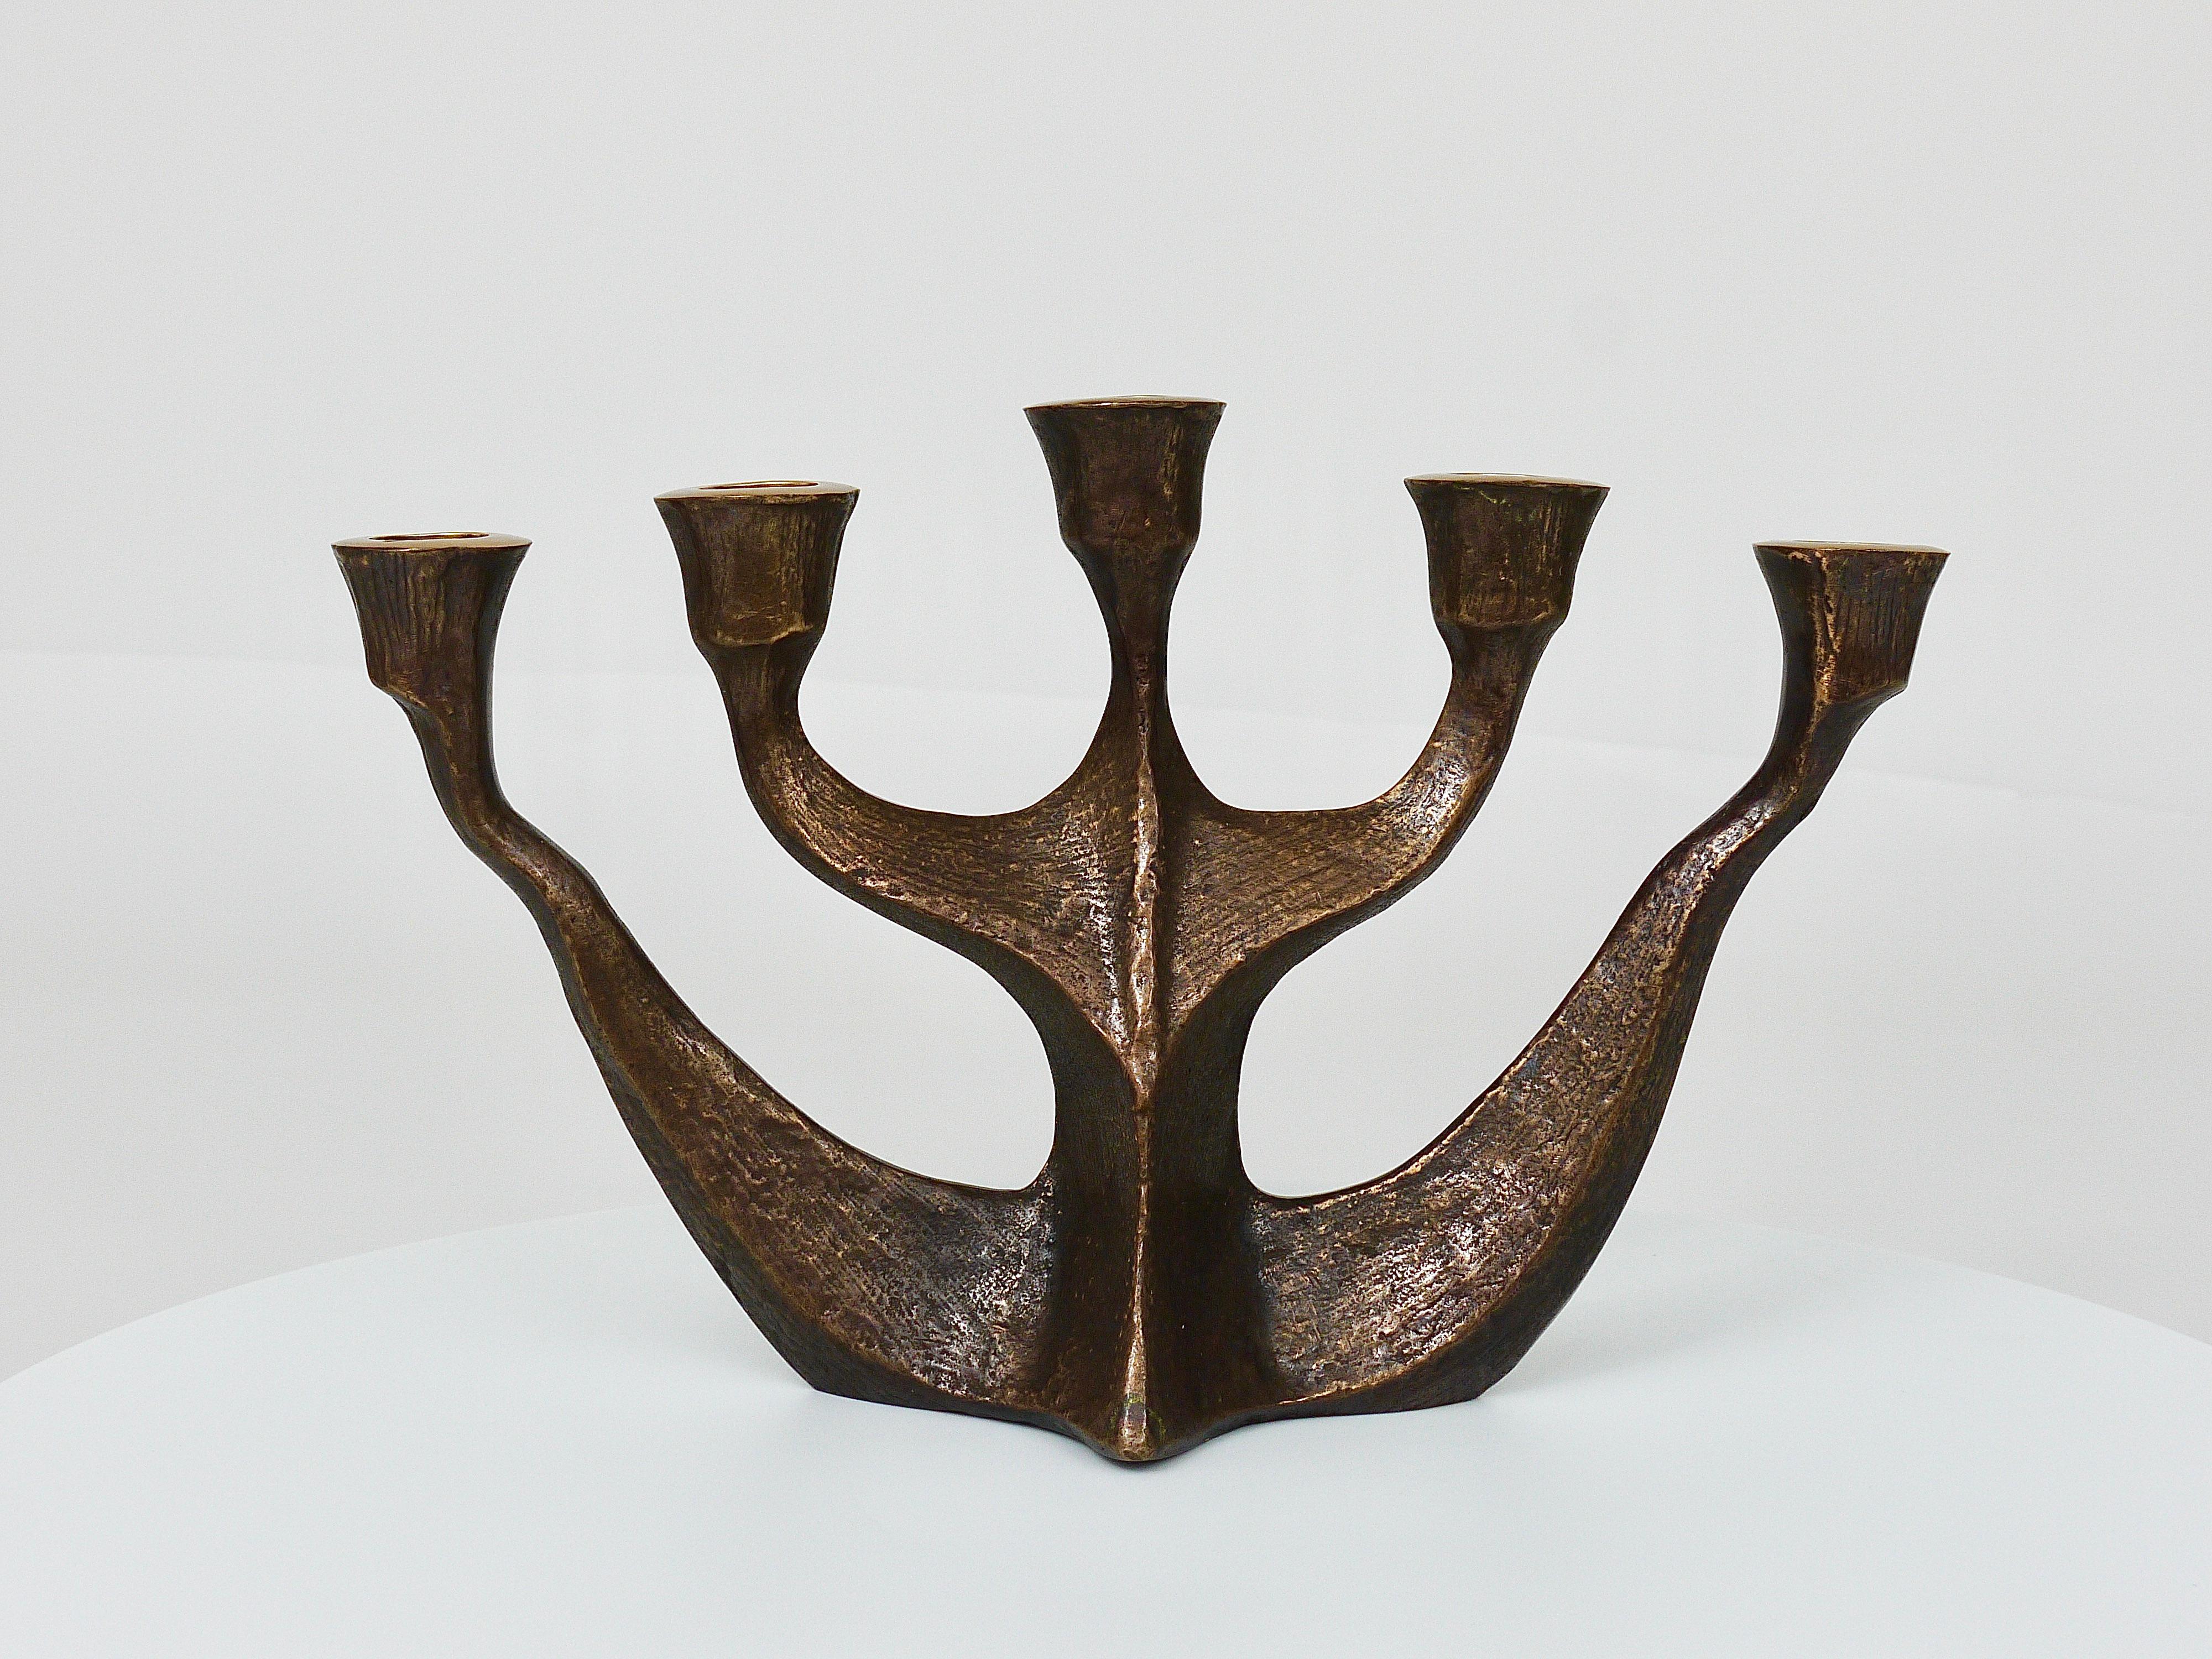 Up to Two Midcentury Brutalist Bronze Candleholders by Michael Harjes, 1960s For Sale 4